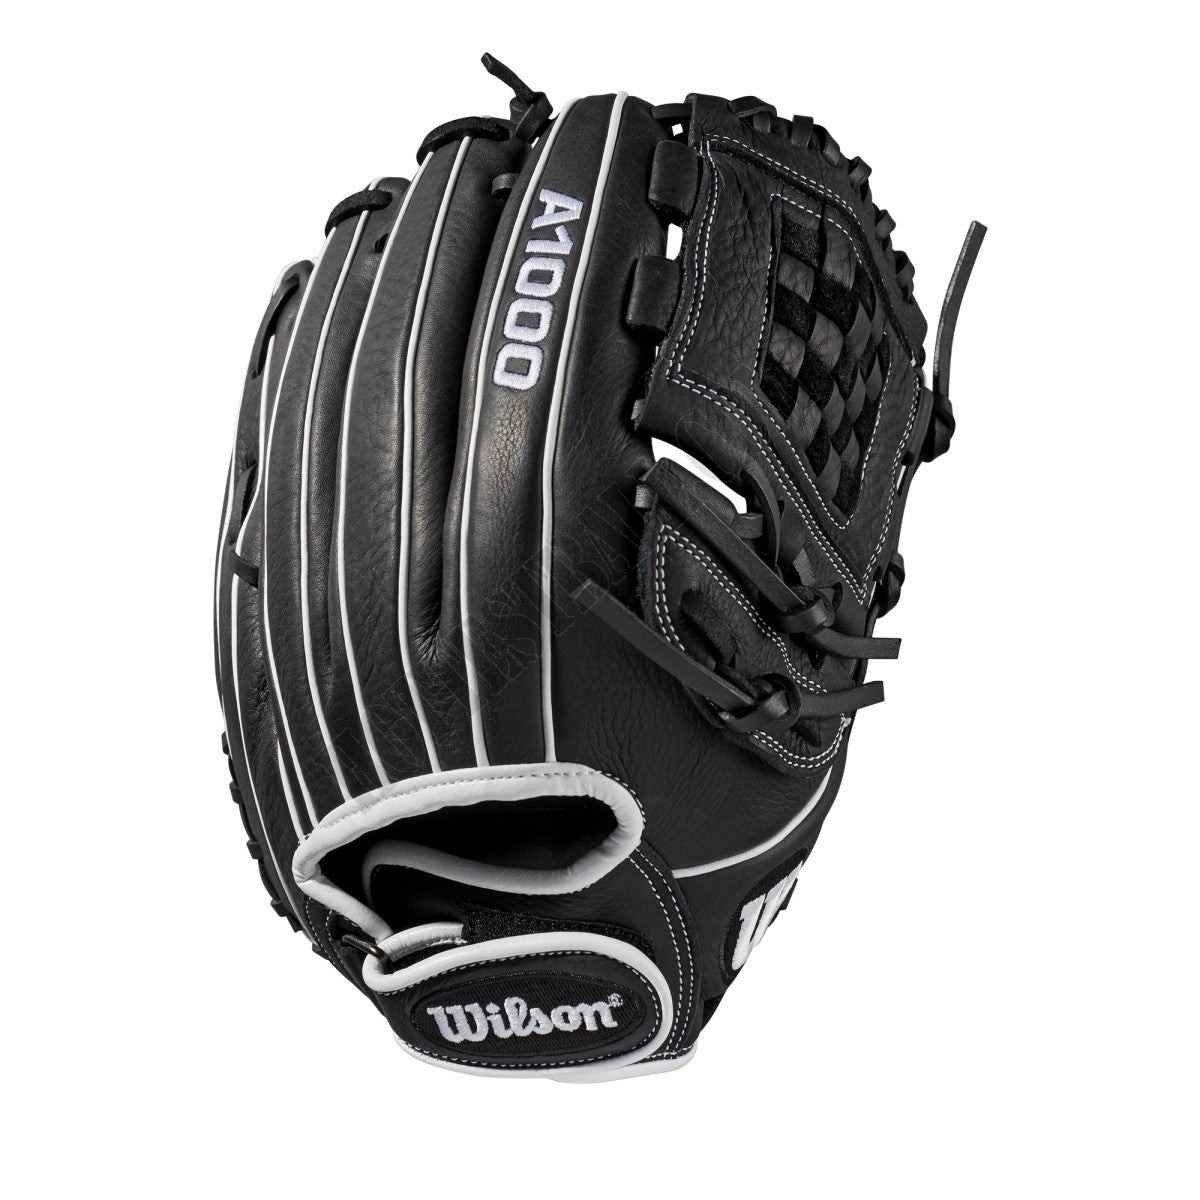 2019 A1000 12" Pitcher's Fastpitch Glove ● Wilson Promotions - -1